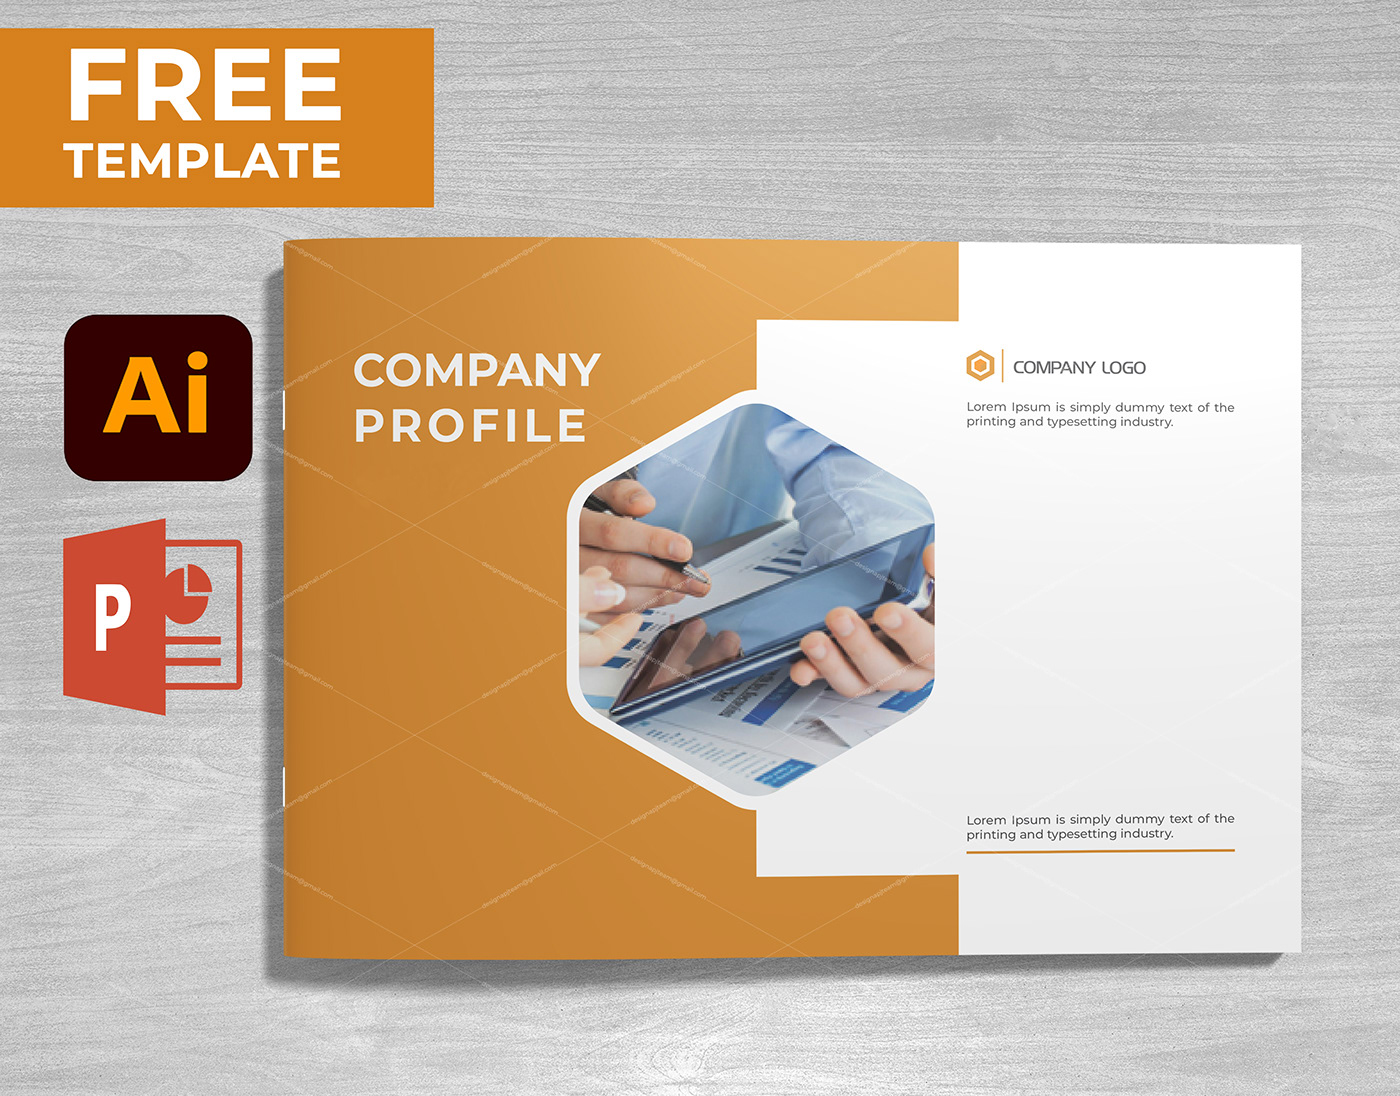 Company Profile Brochure FREE Template Download  Behance Throughout Business Profile Template Free Download